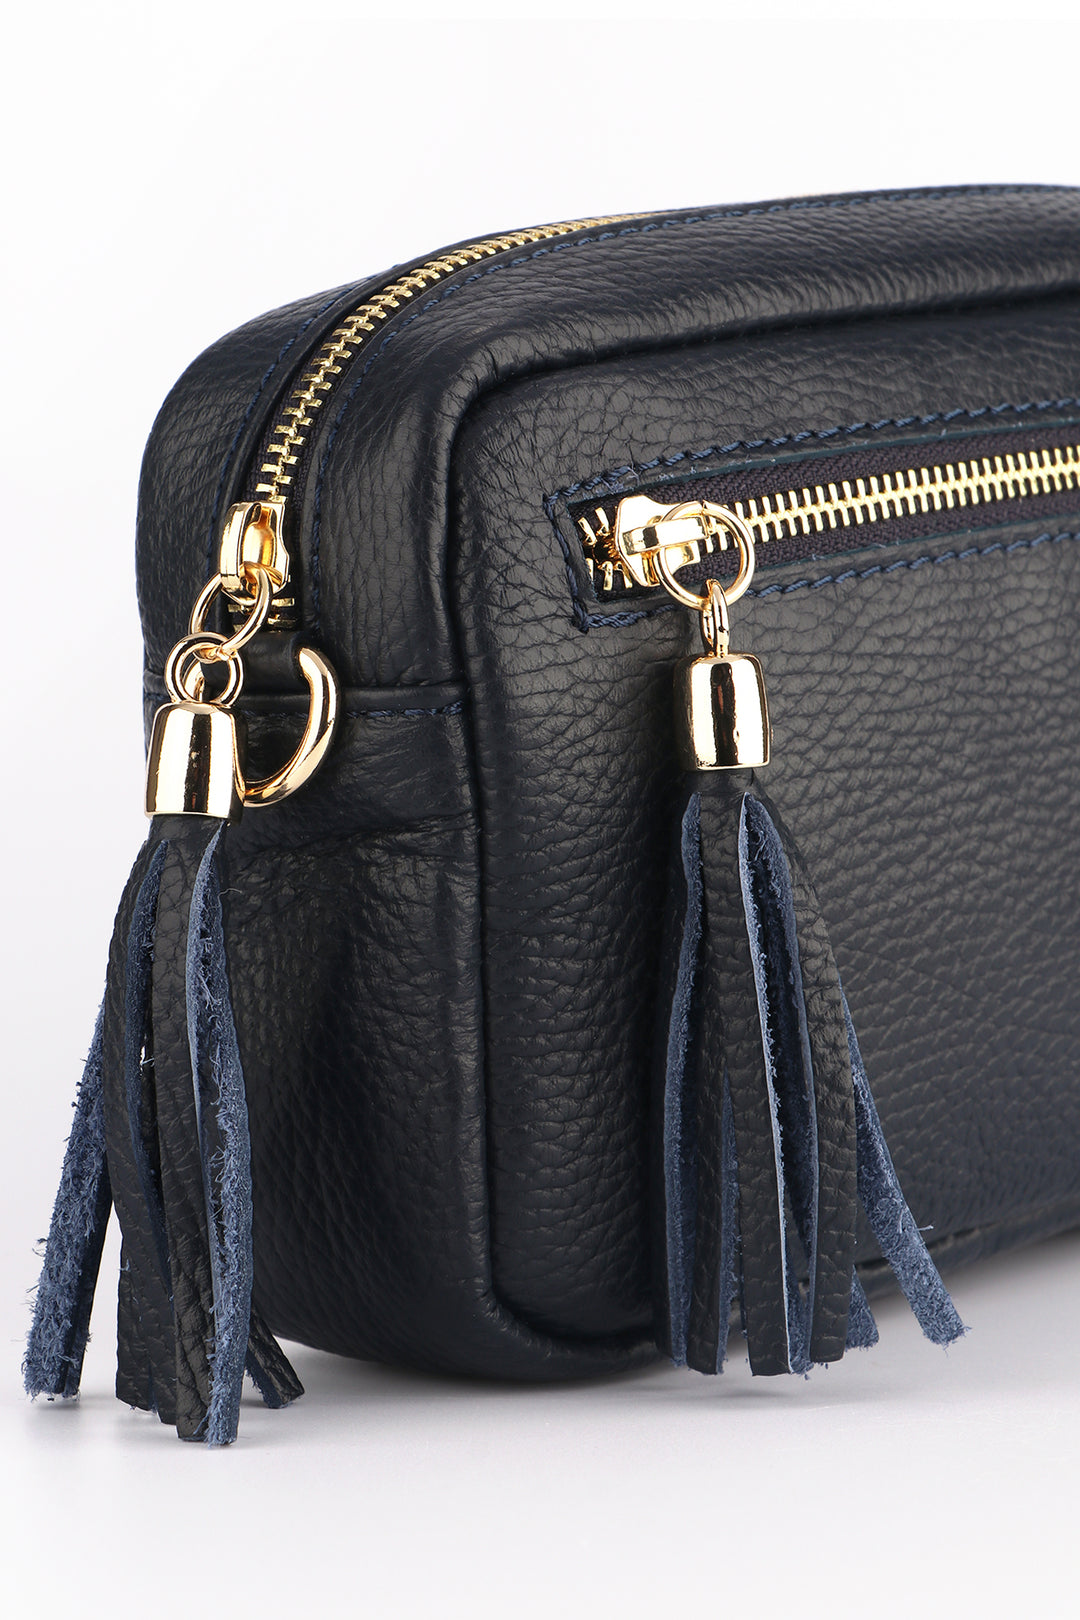 close up of the navy blue leather camera bag with tassles and gold zip fasternings